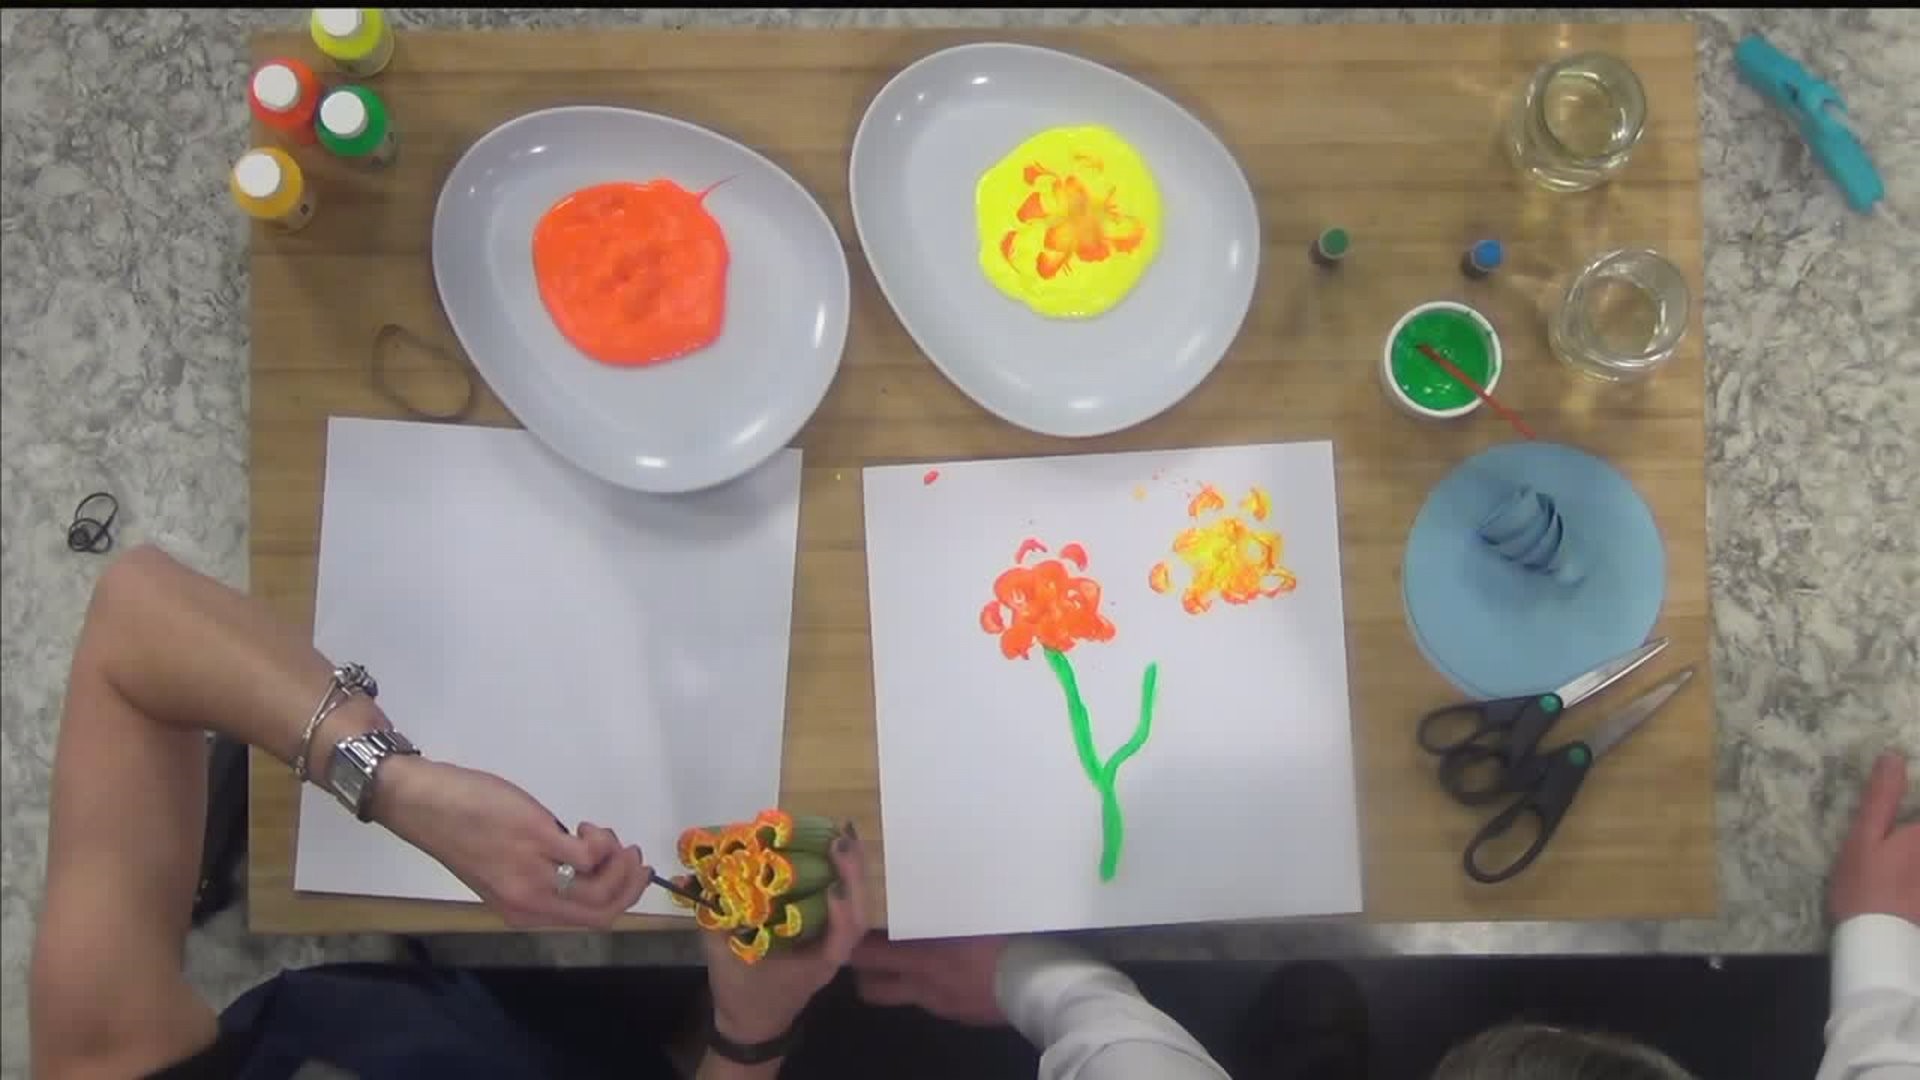 NAILED IT OR FAILED IT: Flower Art